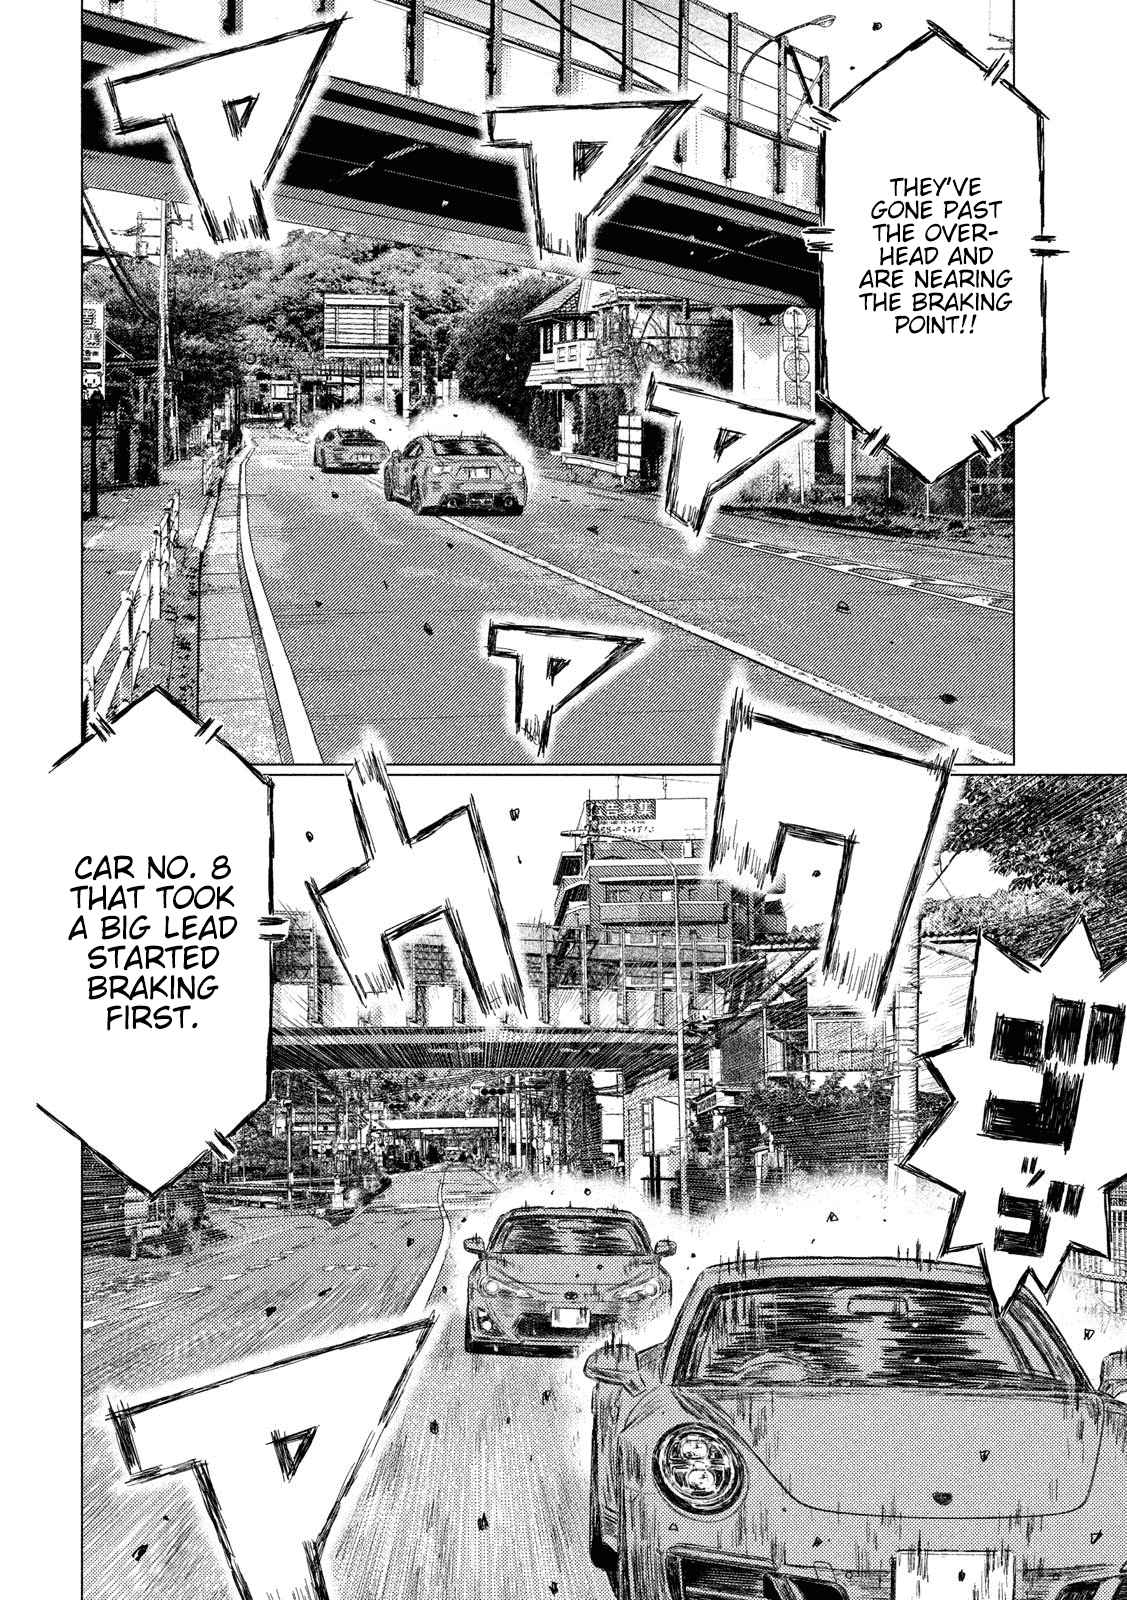 MF Ghost Vol. 4 Ch. 43 The Final Moments